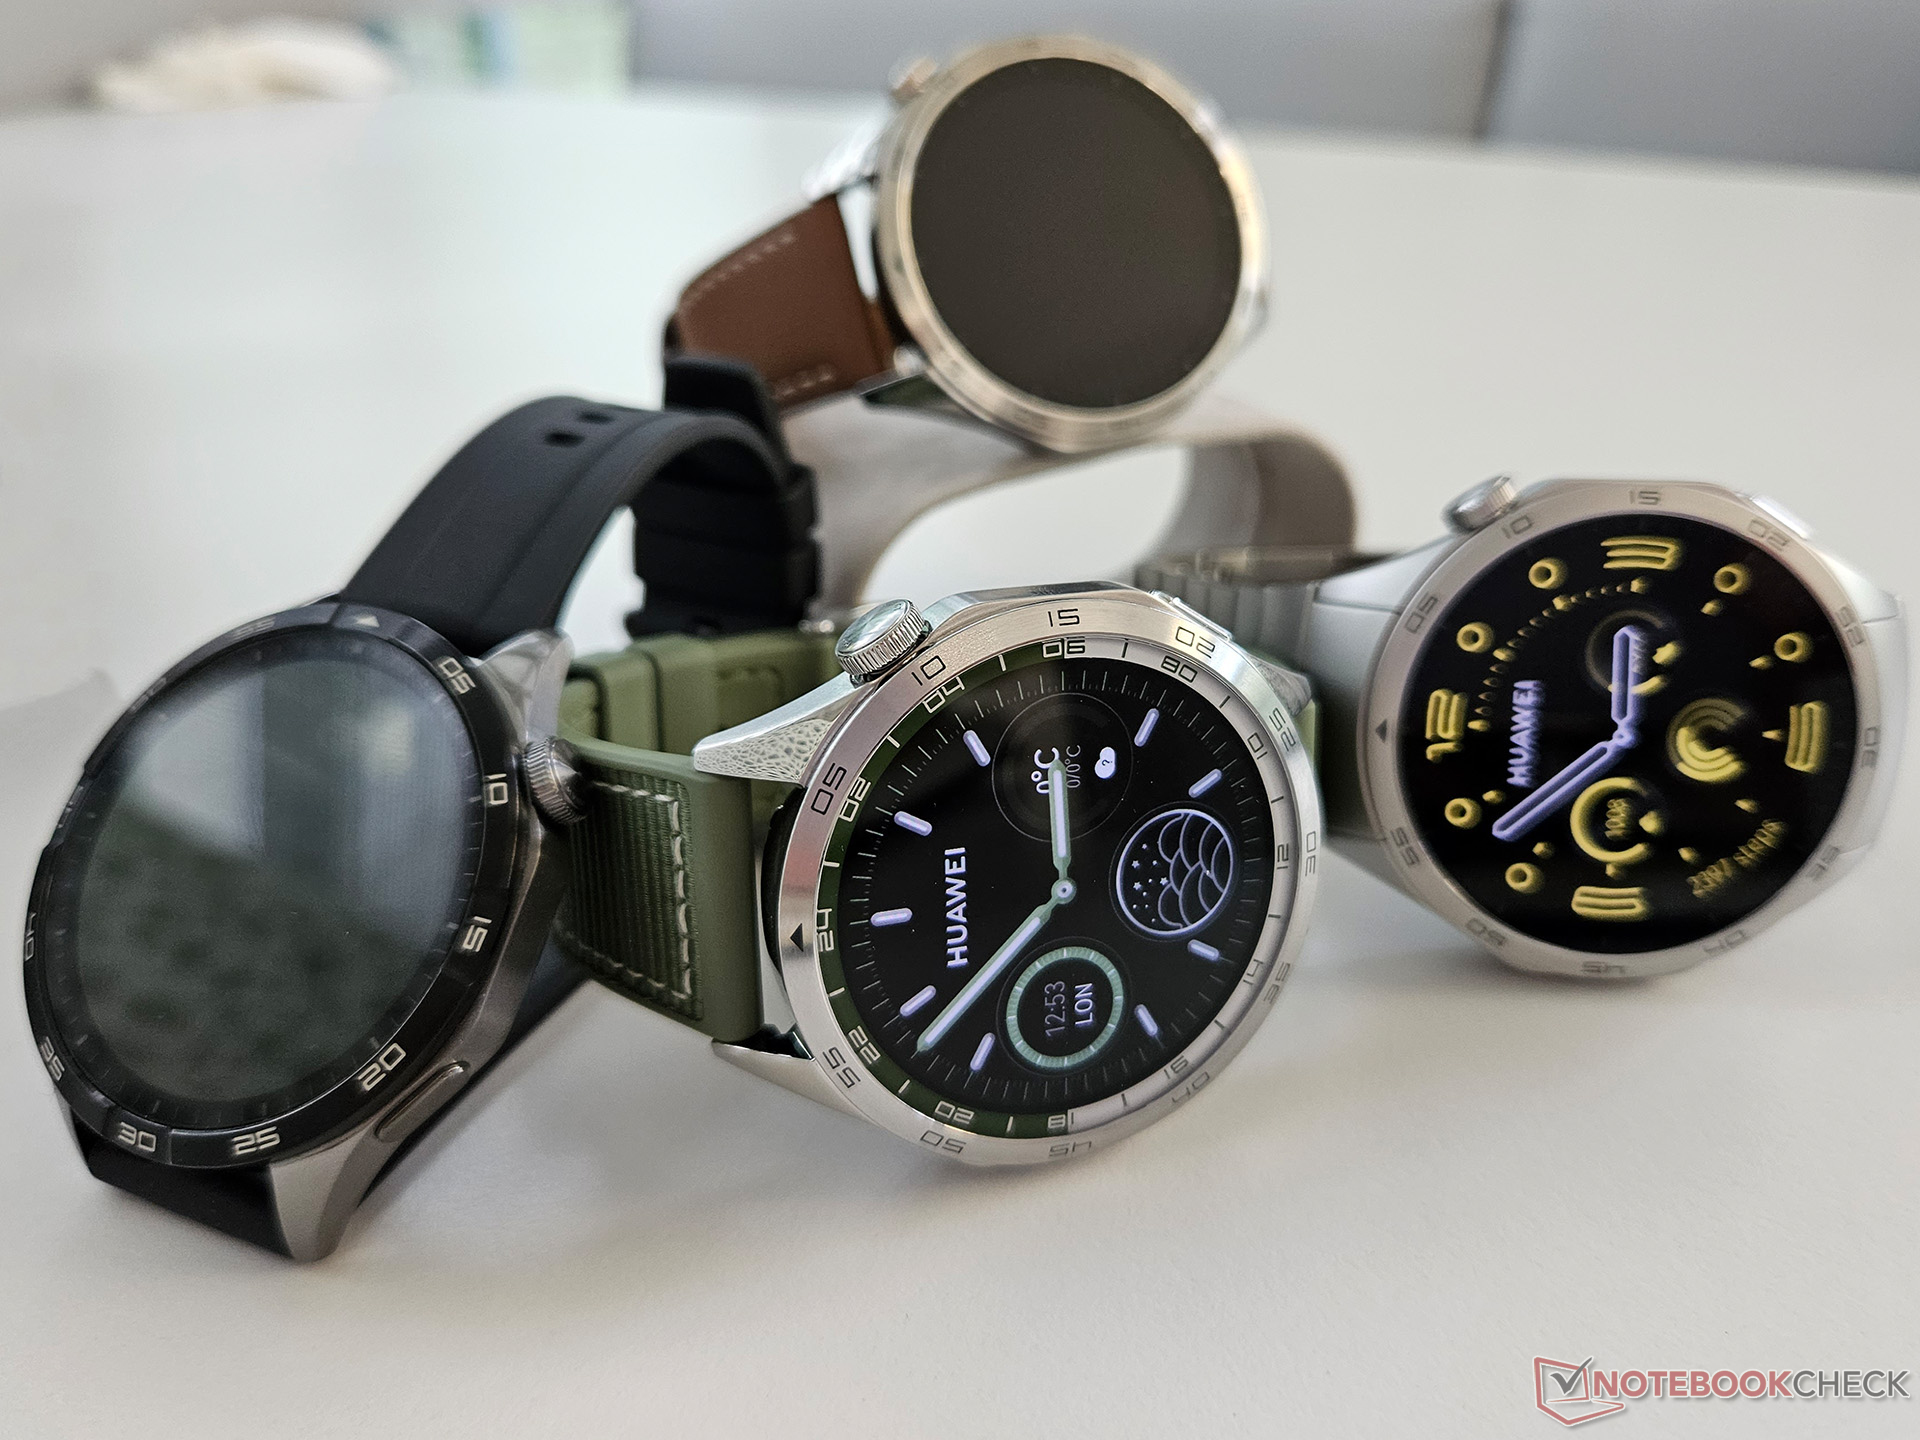 Huawei Watch GT 4 receives usability improvement with latest software update